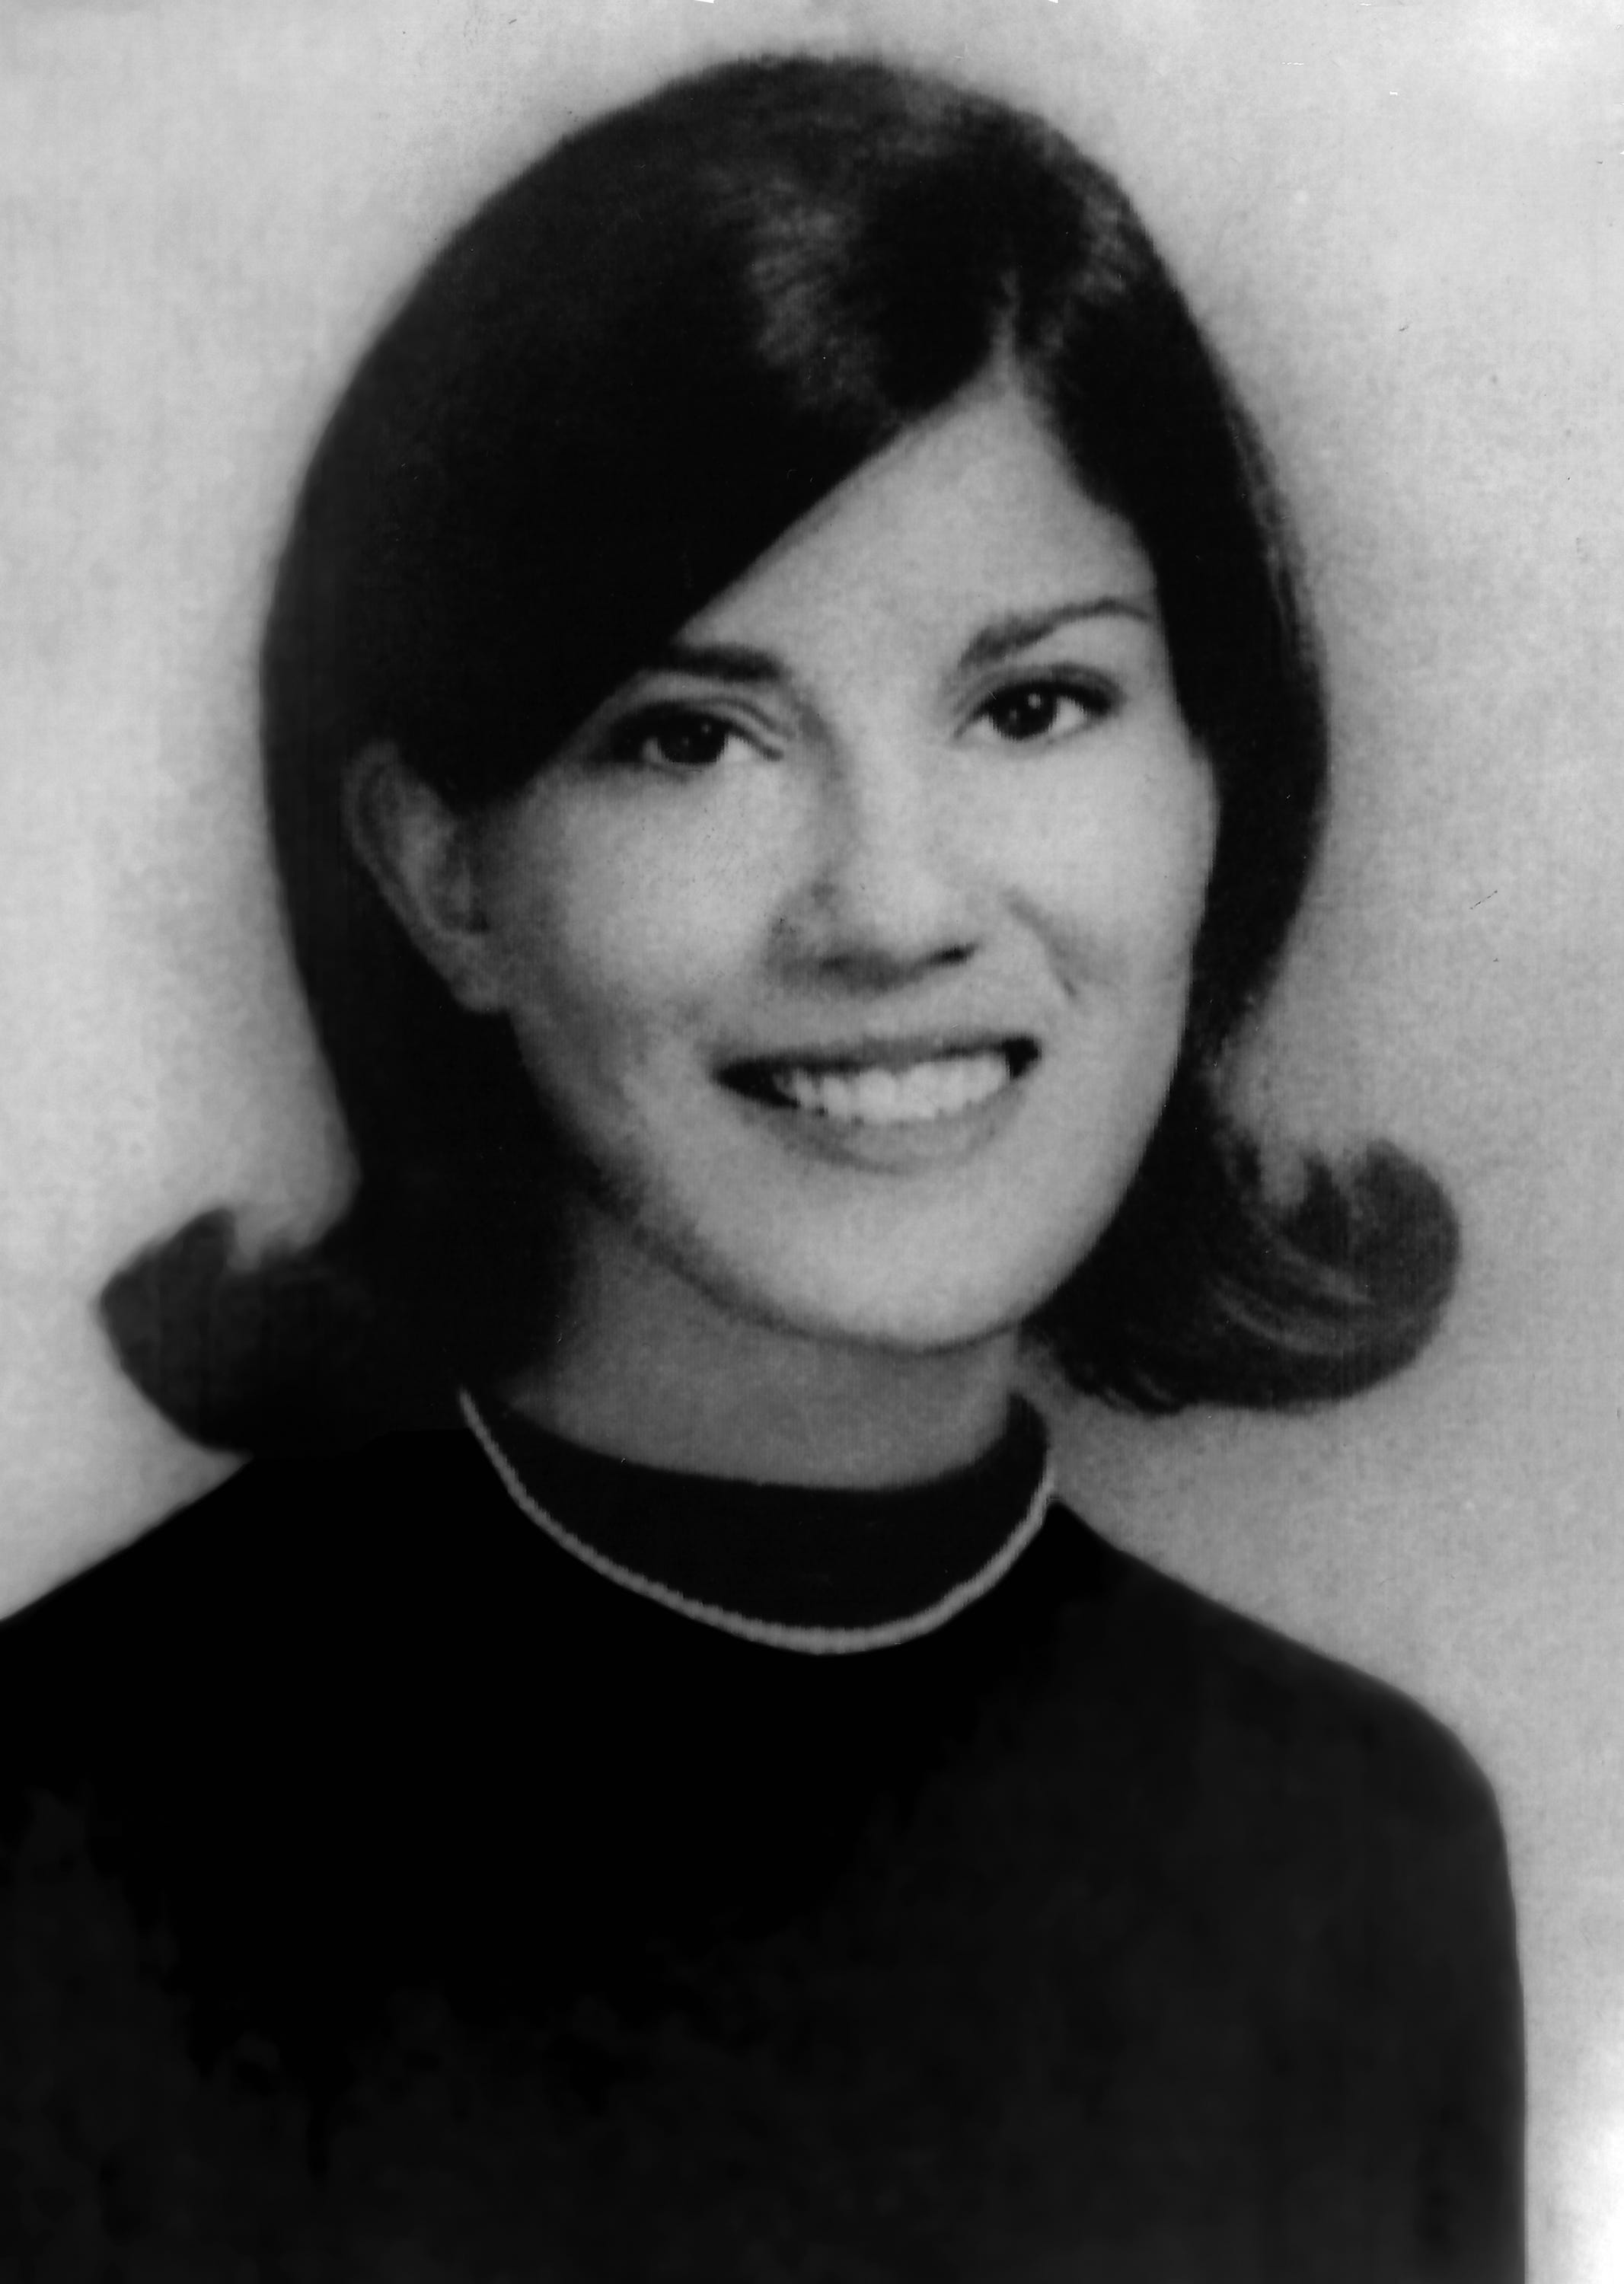 Allison Krause was one of four Kent State University students who was shot and killed by the Ohio National Guard on May 4, 1970.